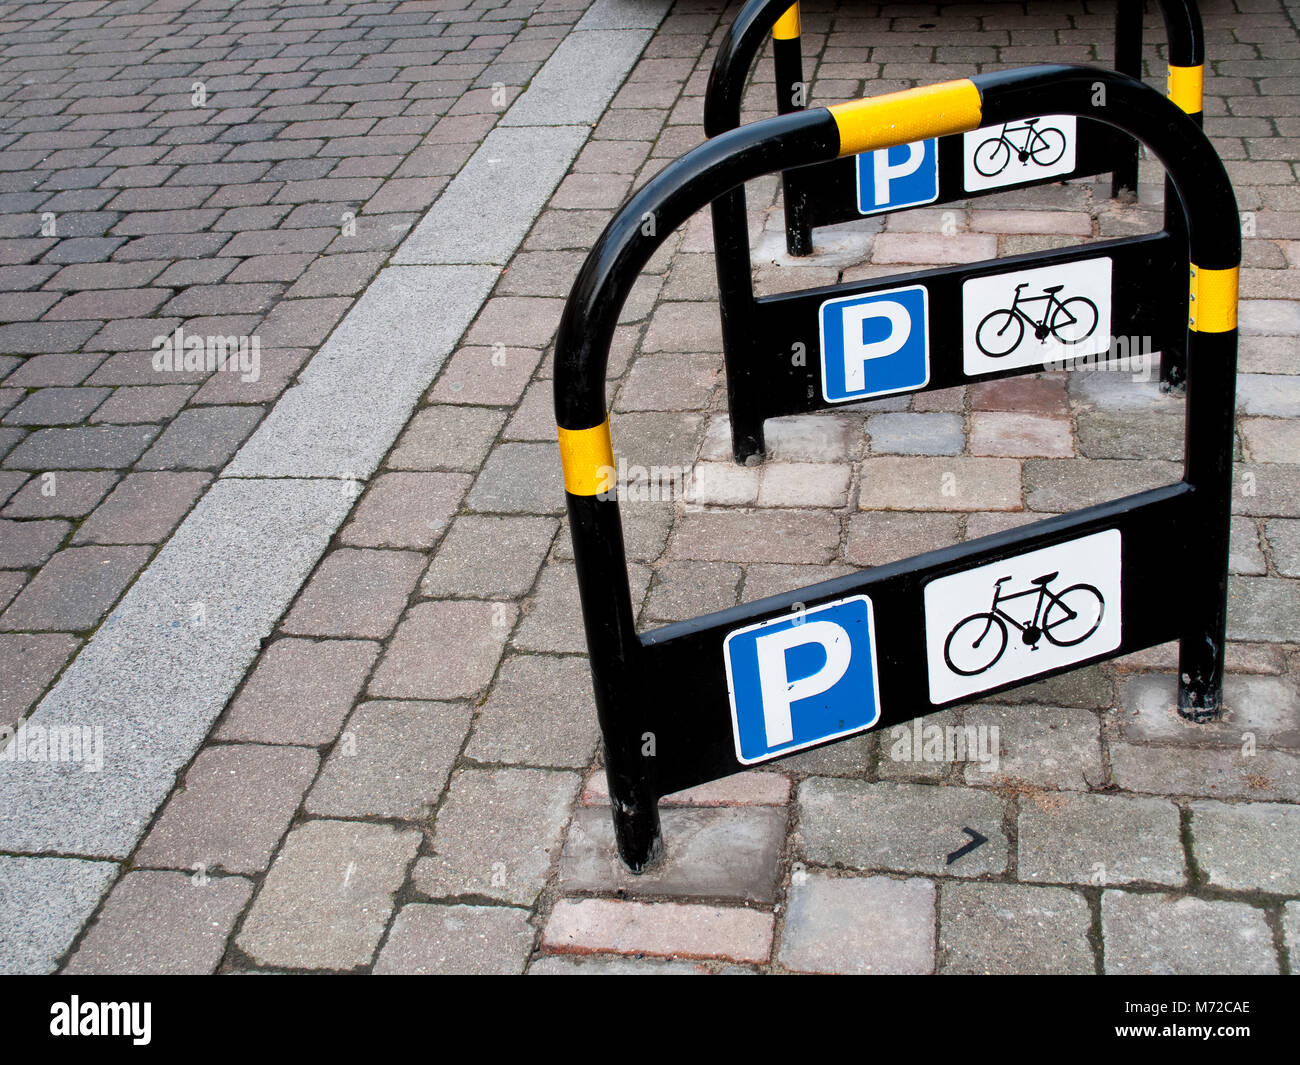 Metal public bicycle parking stands situated on stone paved area of main shopping street Stock Photo